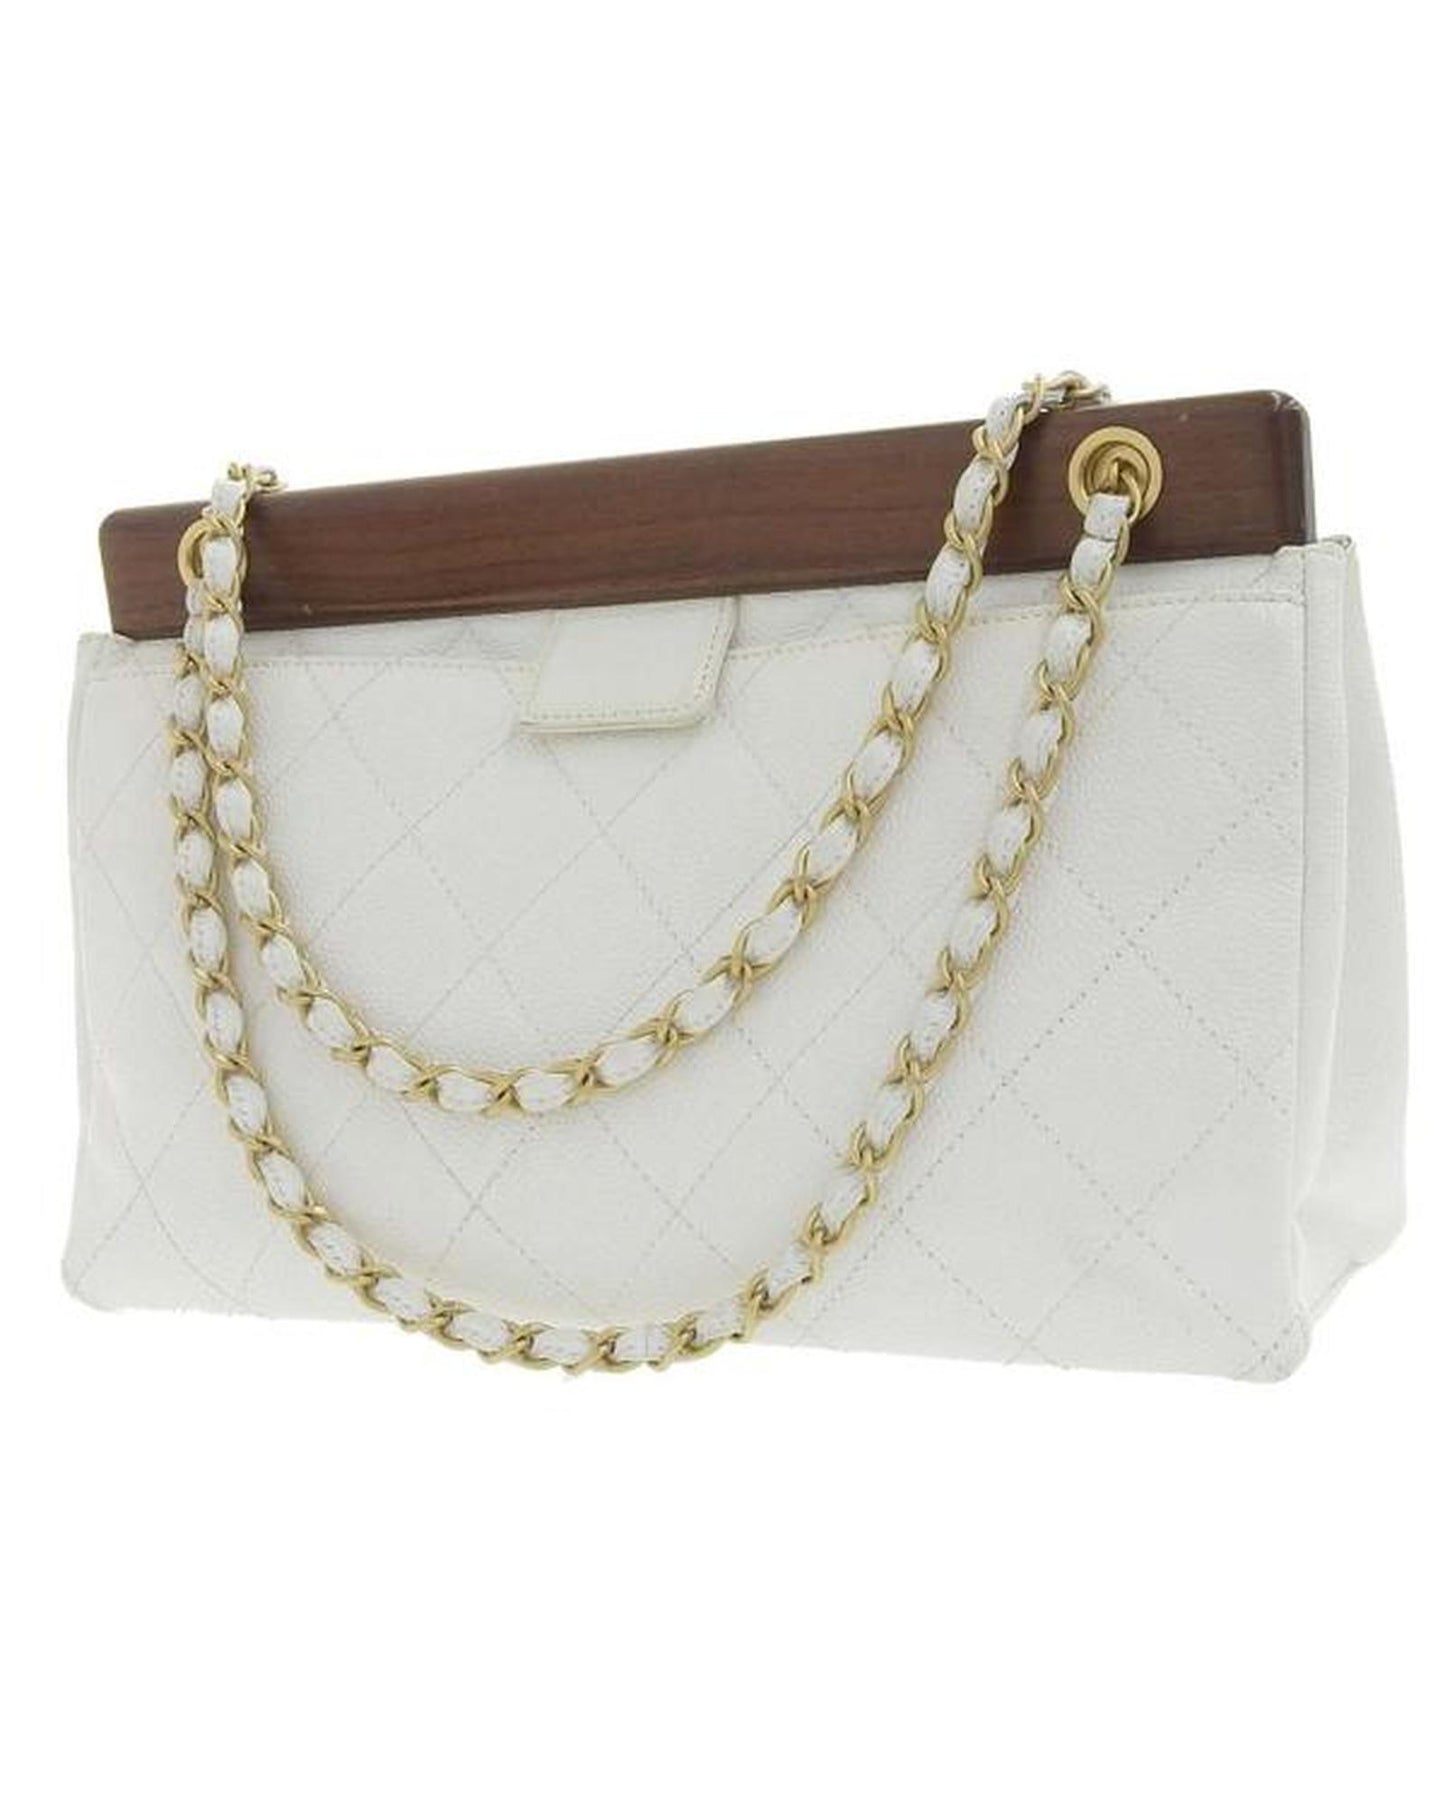 Chanel Women's CC Quilted Wooden Bar Shoulder Bag in White